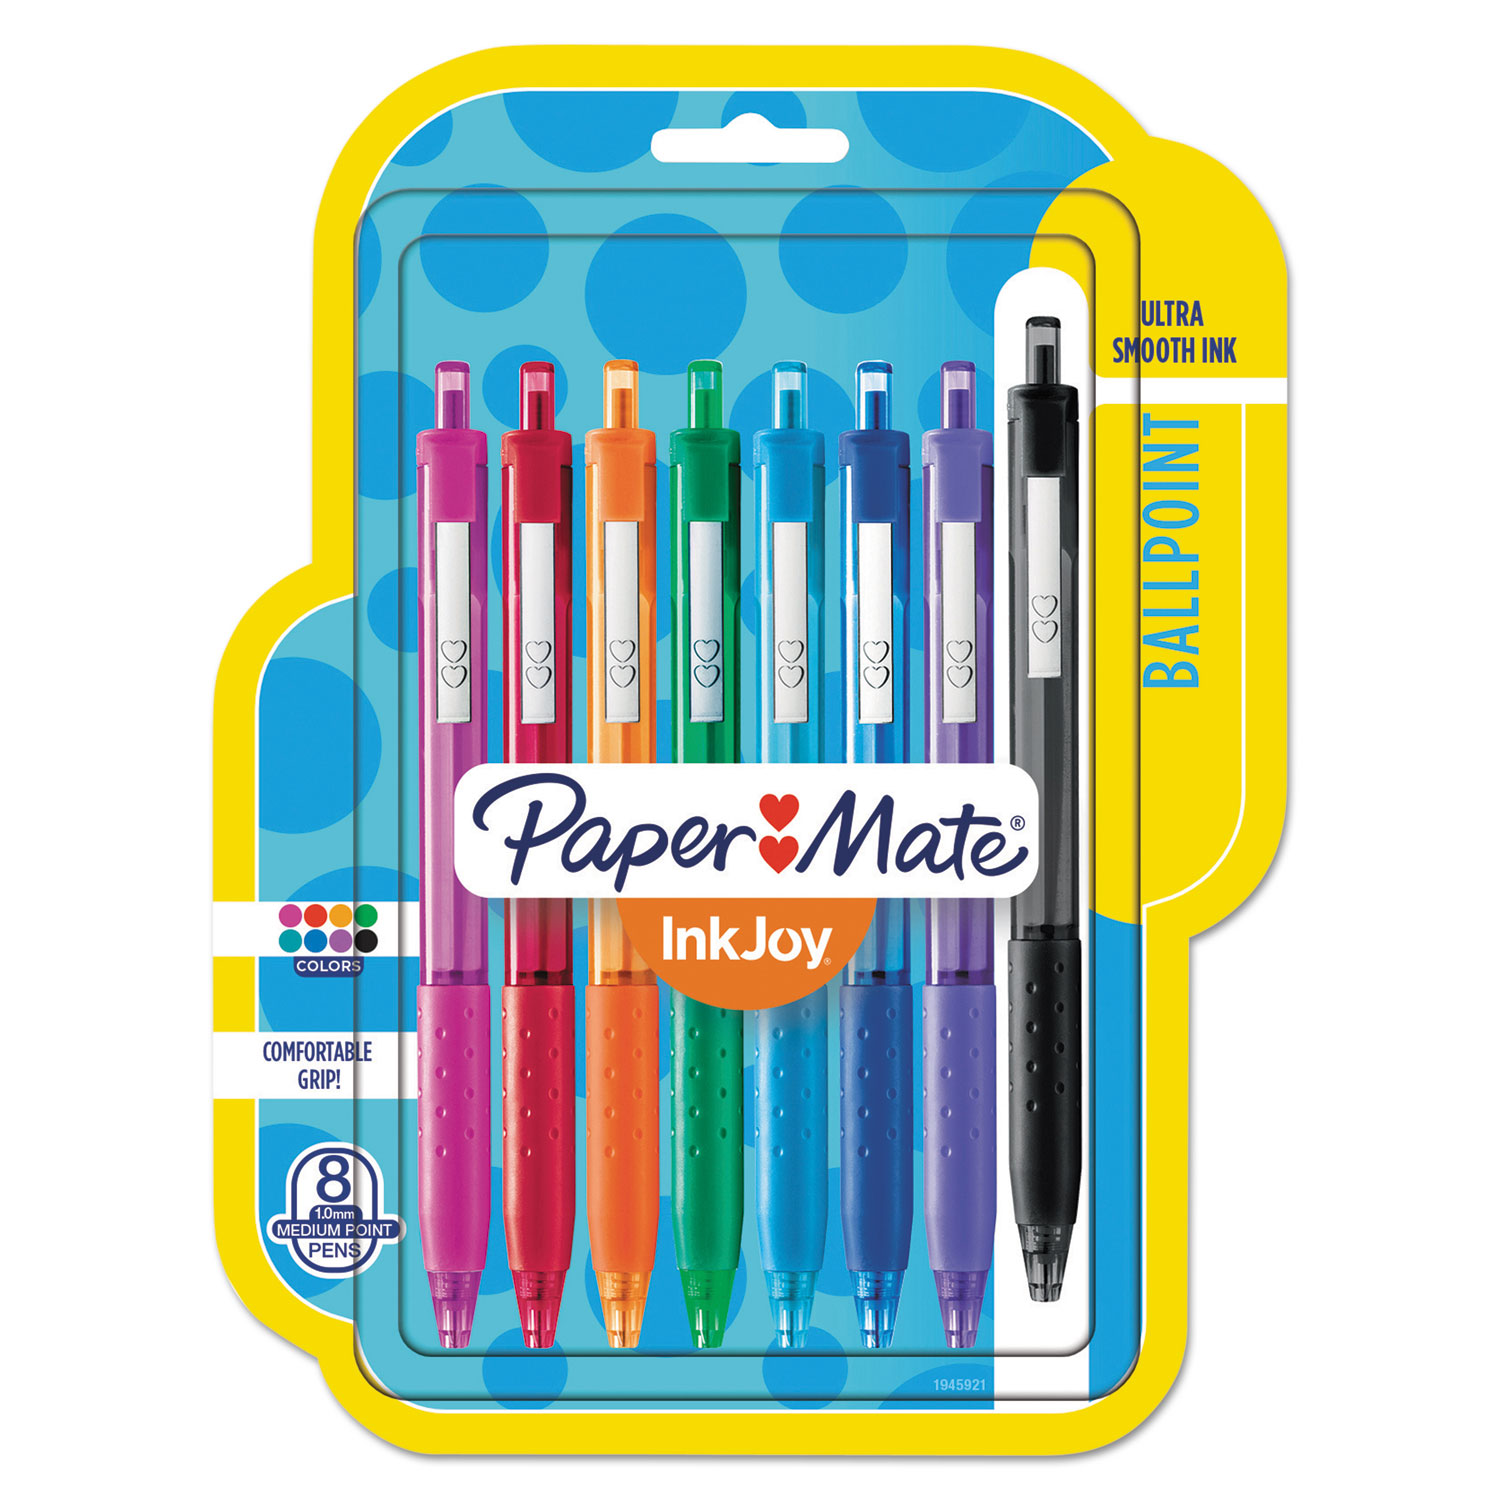 InkJoy 300 RT Ballpoint Pen Retractable, Medium 1 mm, Assorted Ink and Barrel Colors, 8/Pack